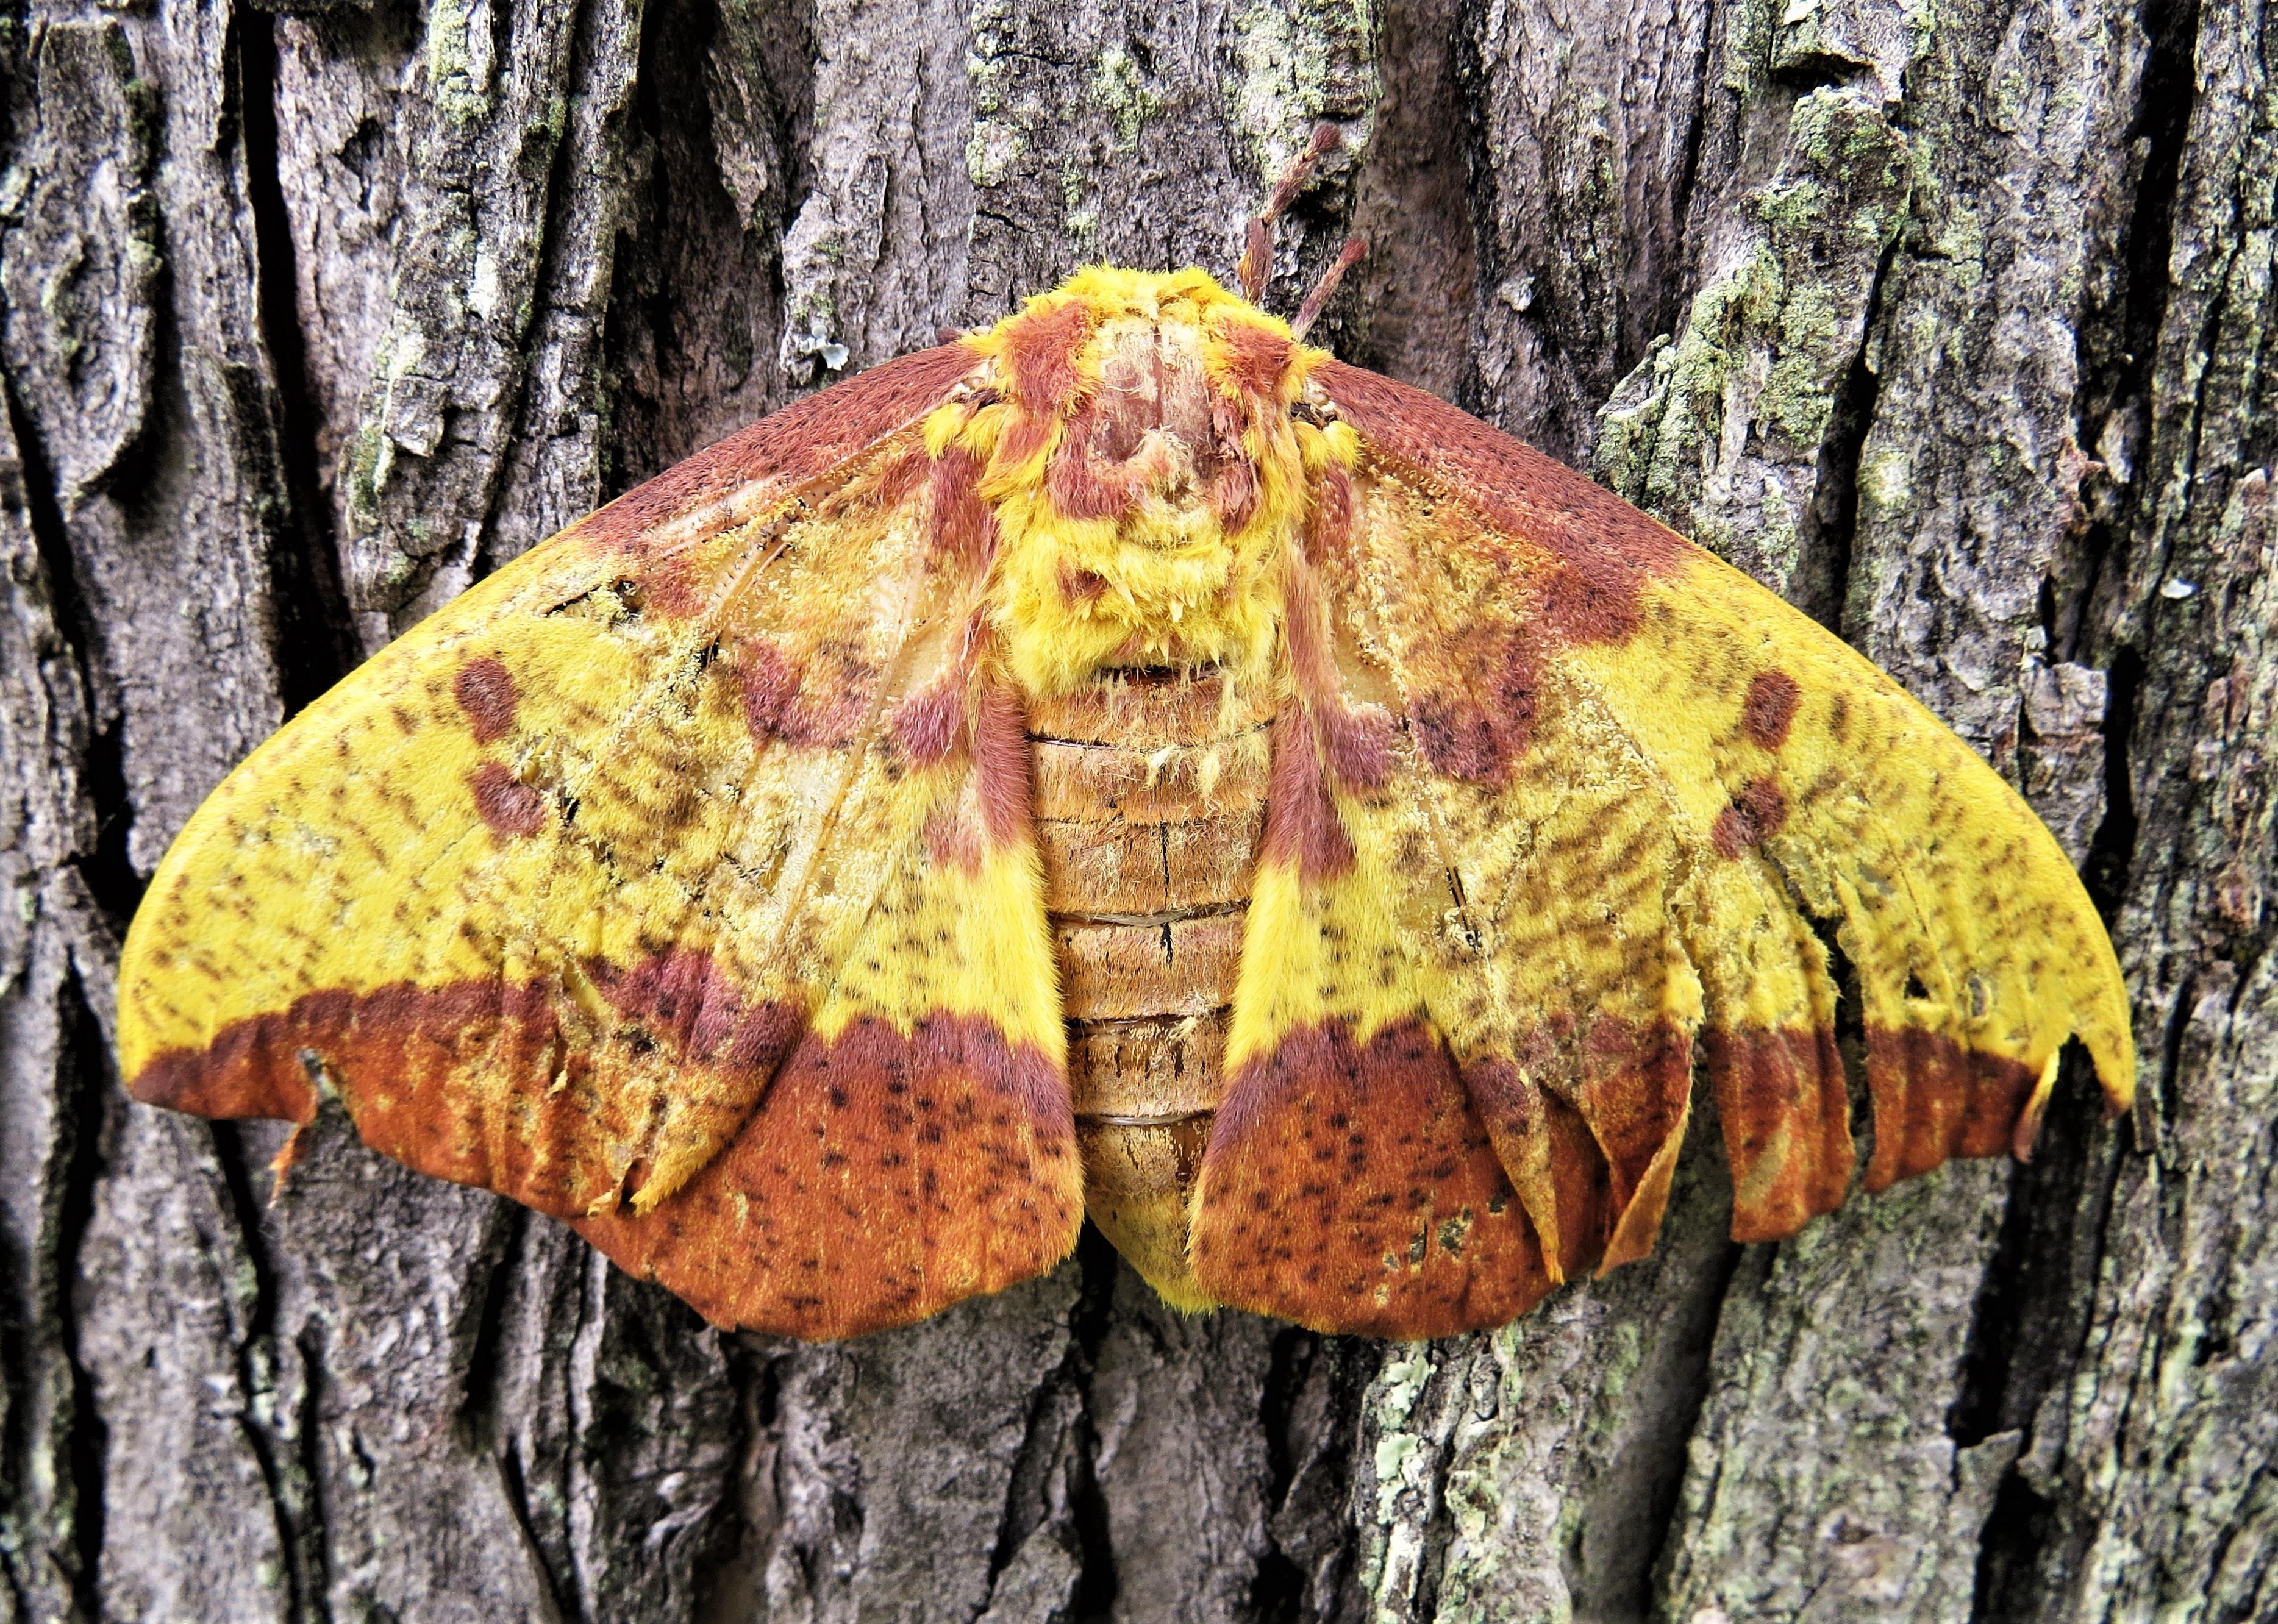 Large yellow-and-brown-red imperial moth clinging to the bark of a tree.